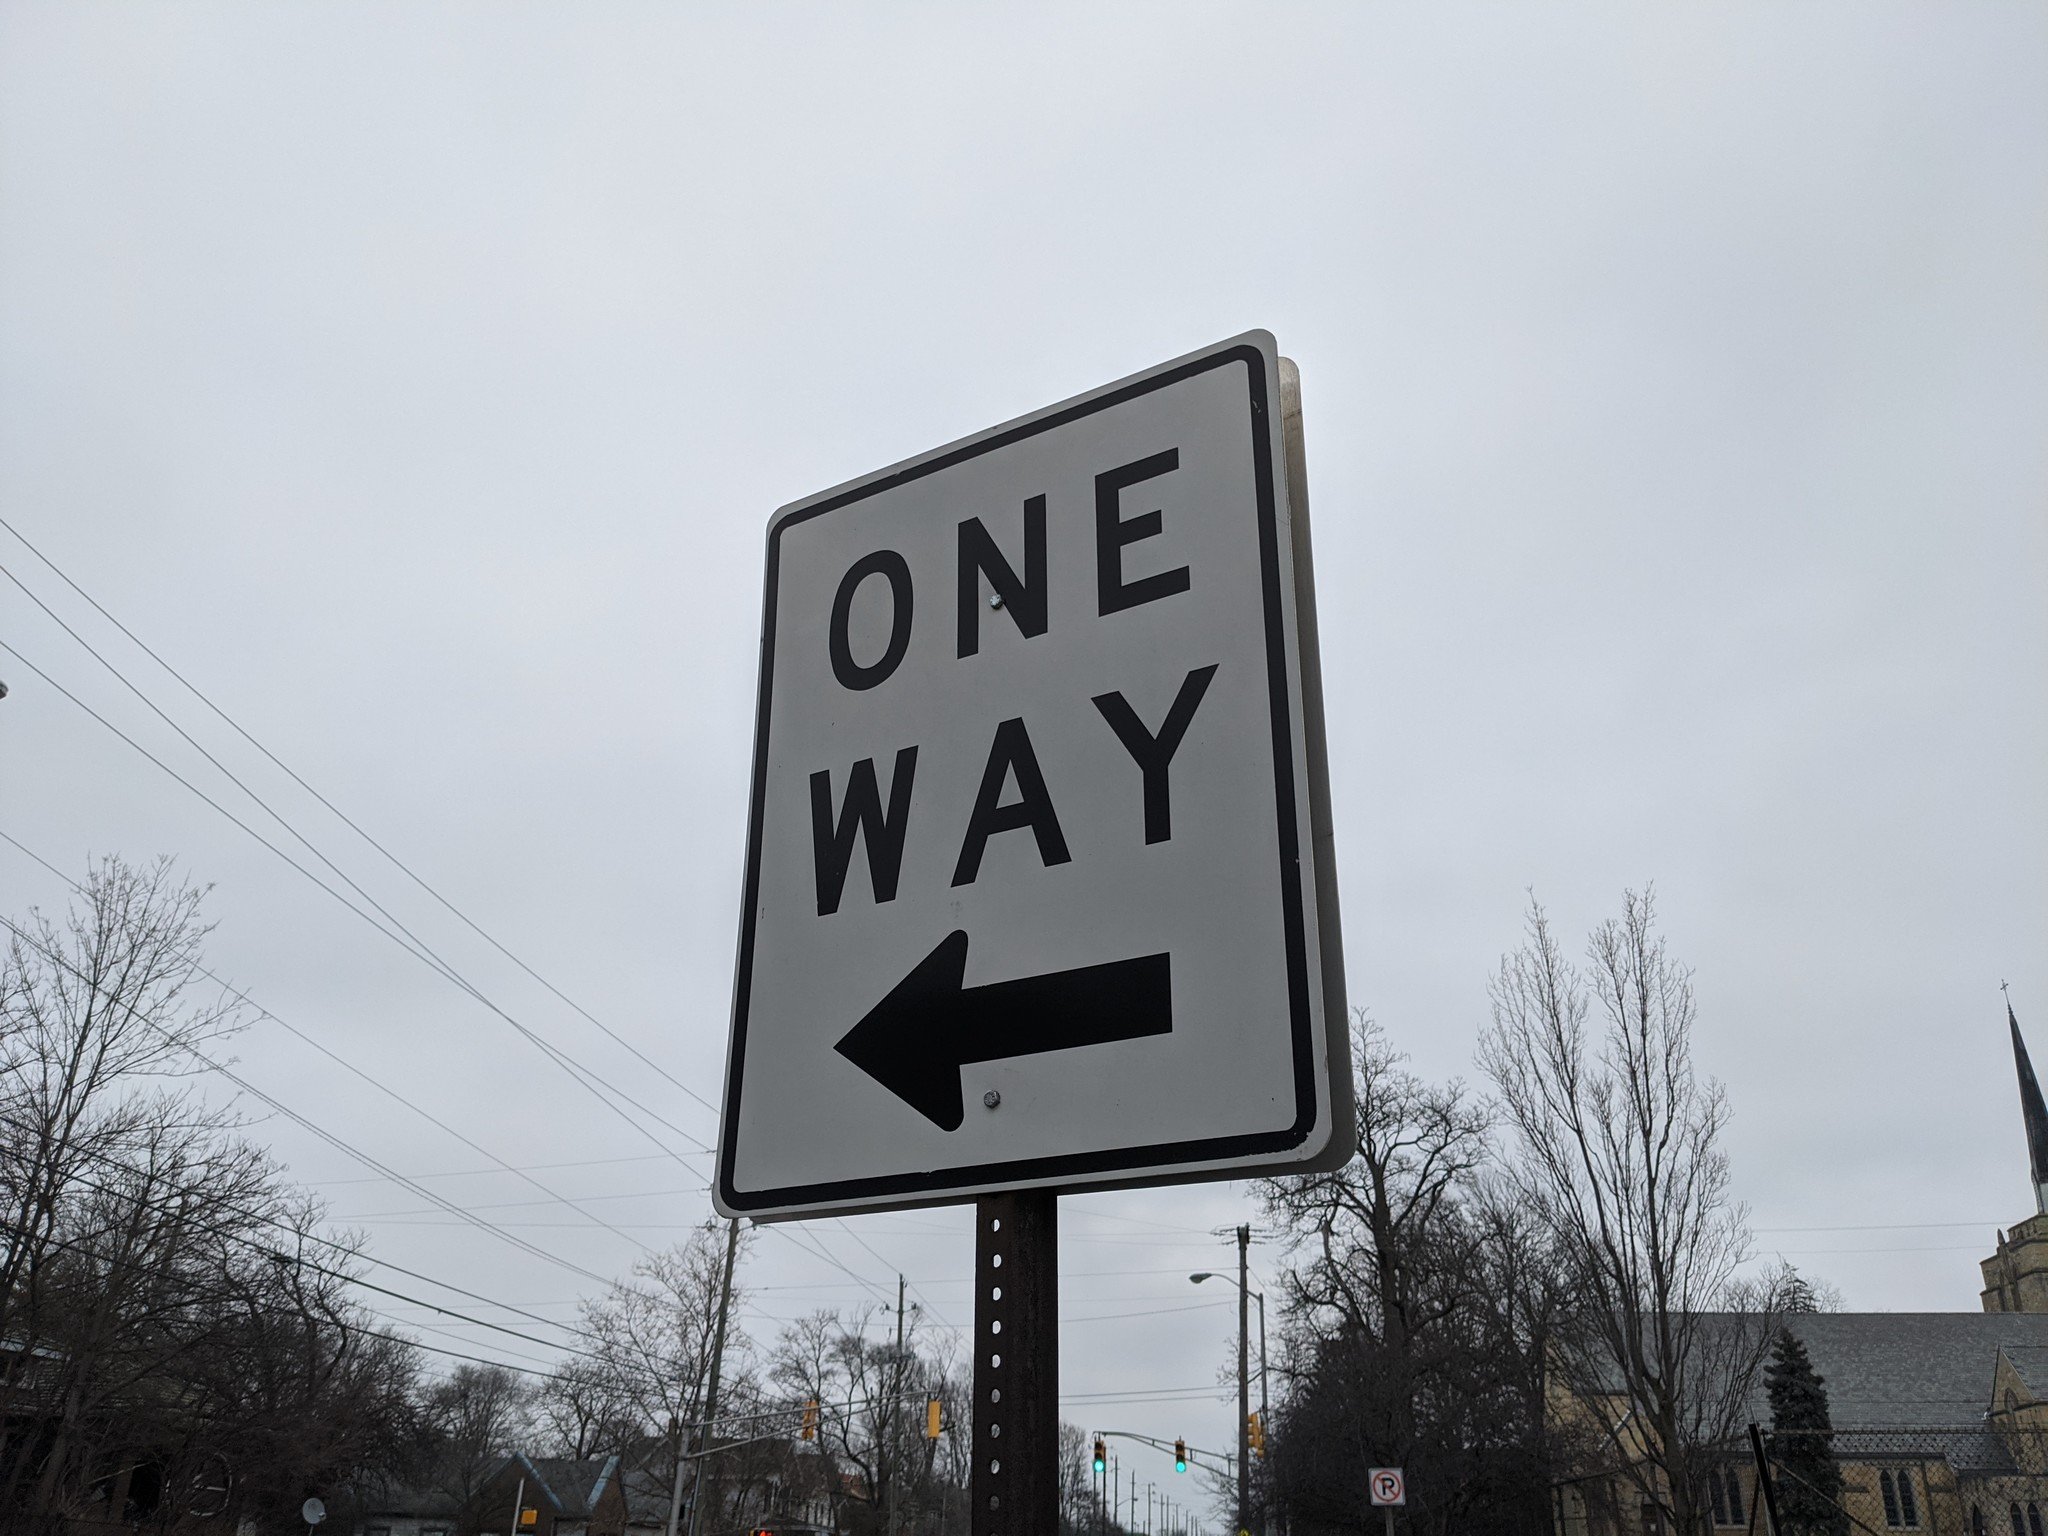 One Way sign shot on the Pixel 4